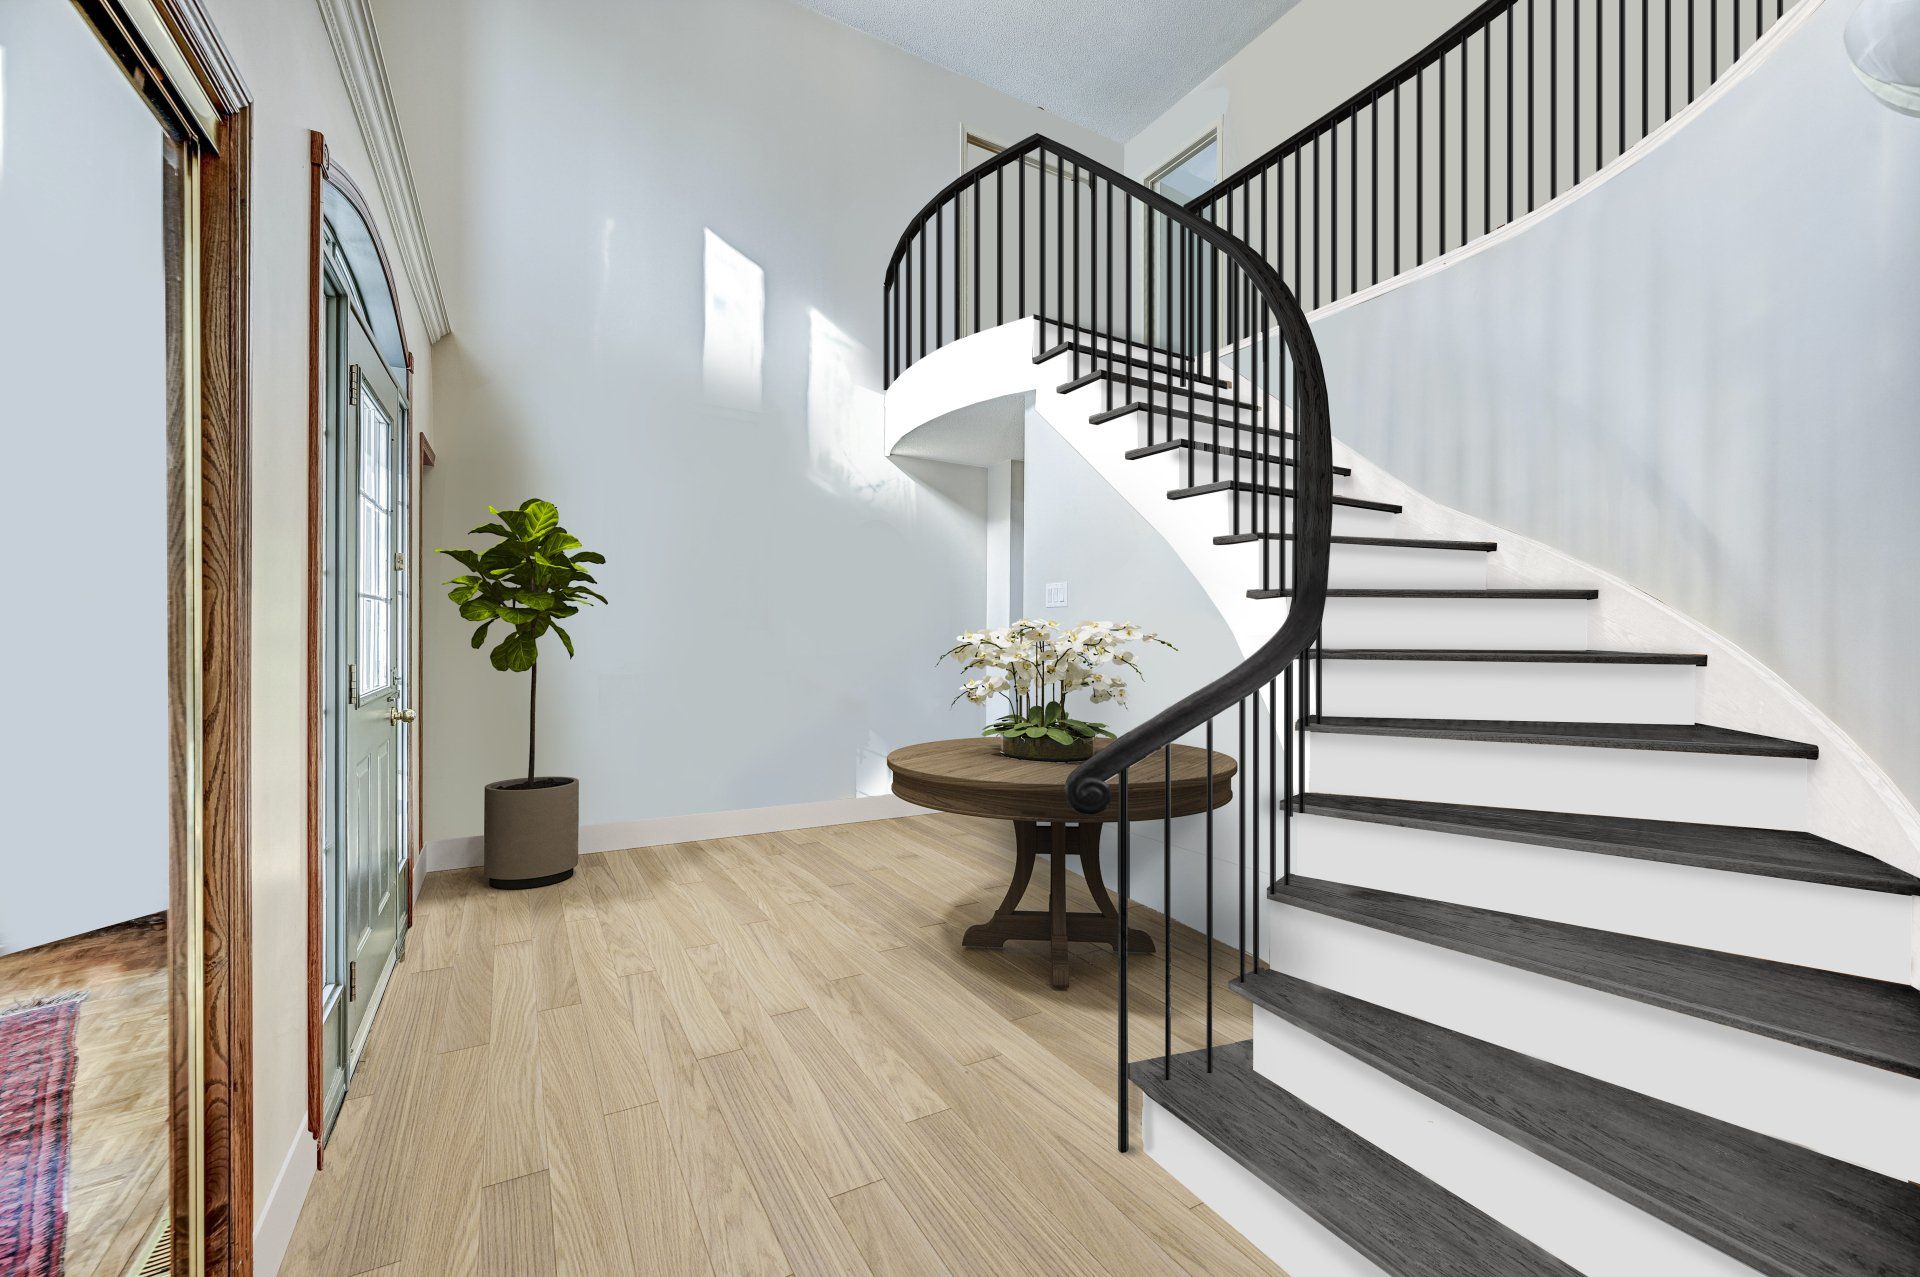 A virtually staged and renovated spiral staircase